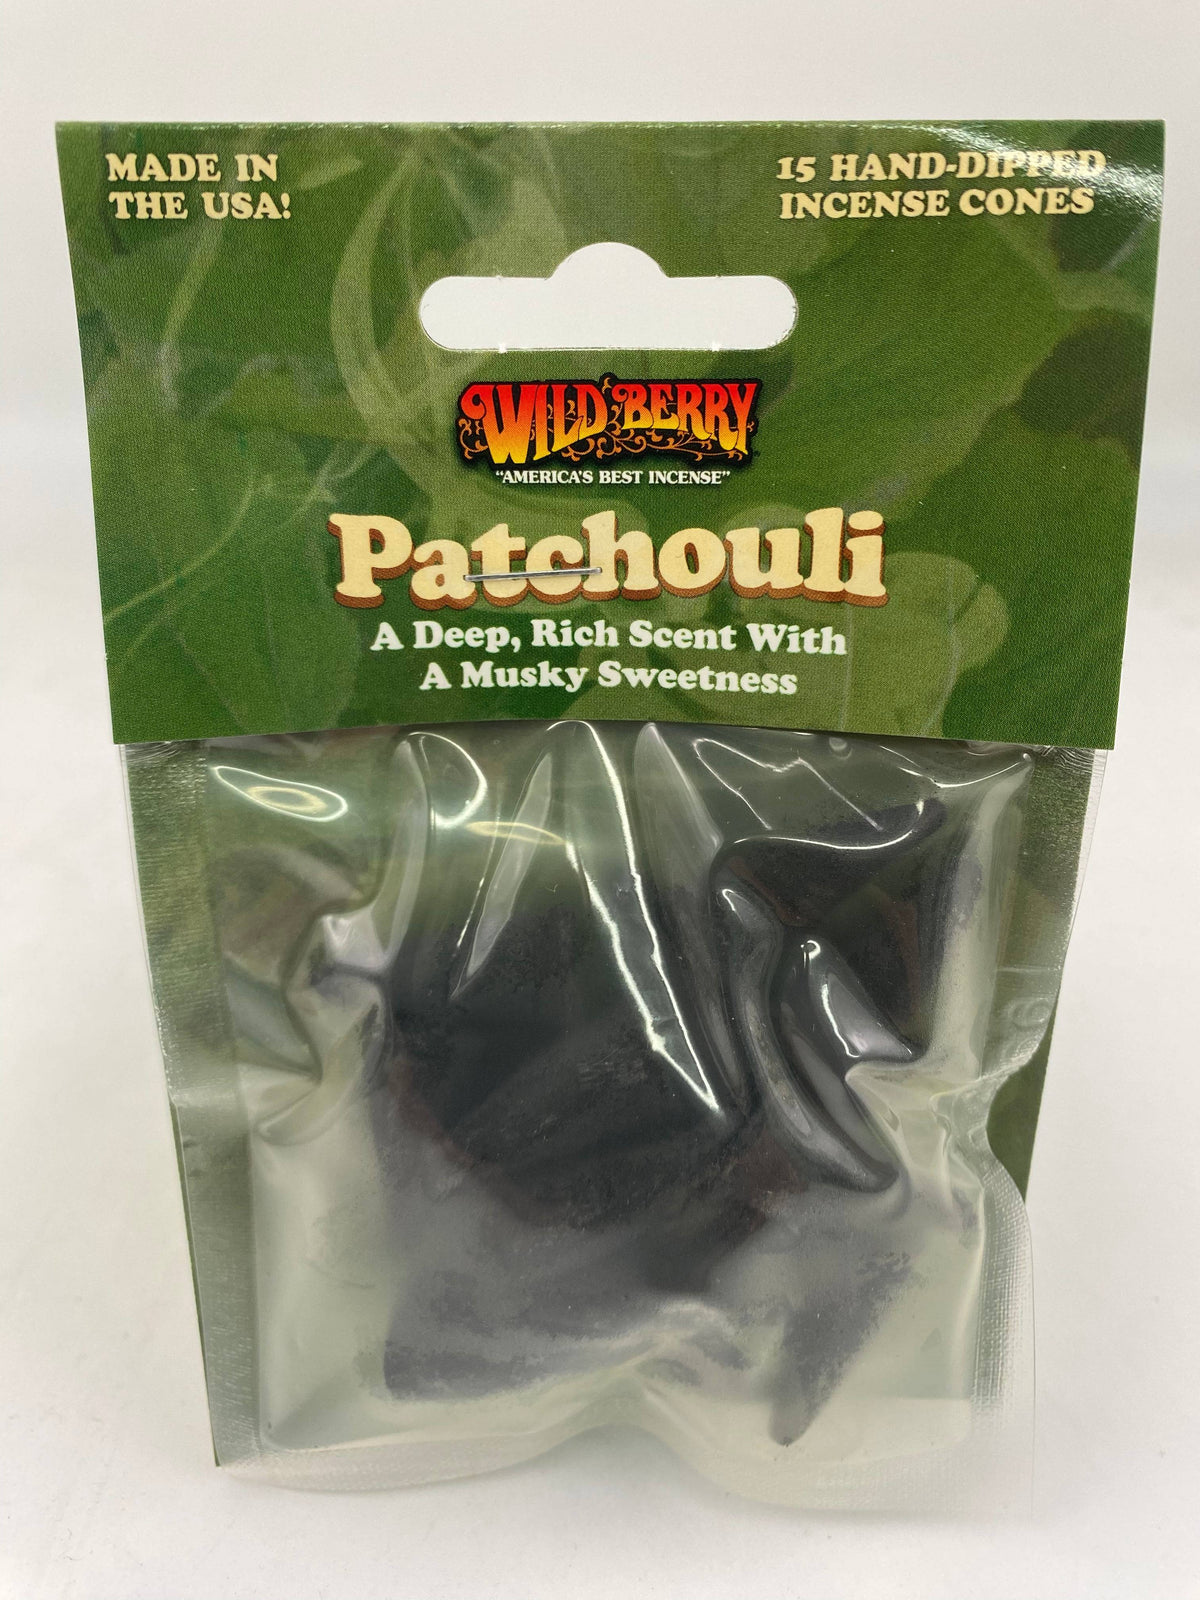 WILDBERRY PATCHOULI CONES 15ct PACKAGED